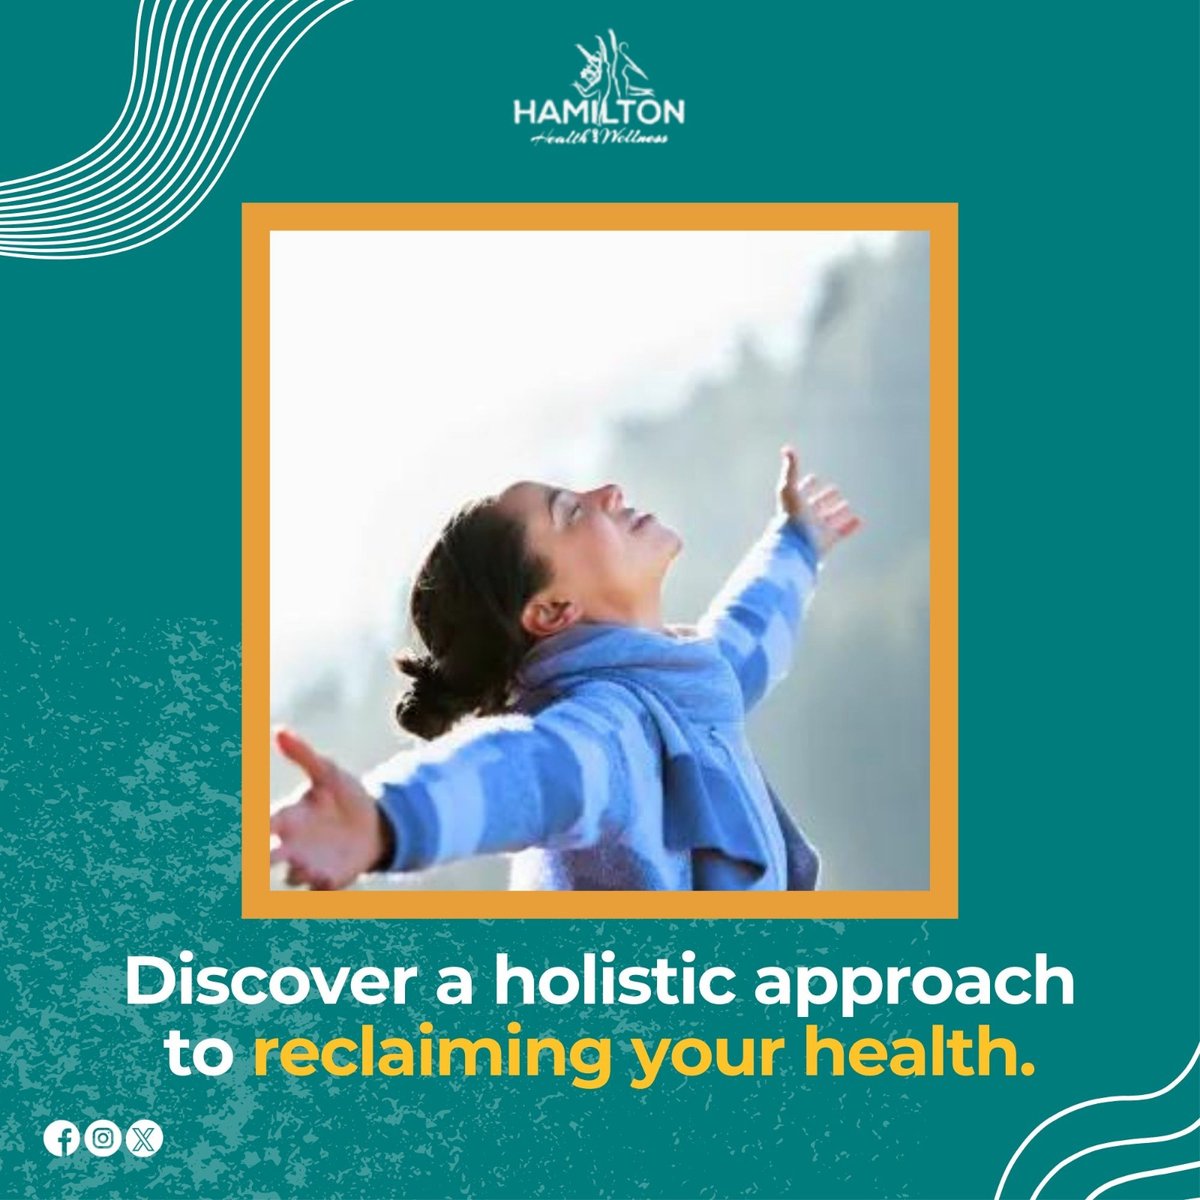 Embrace a journey towards understanding your body's chemistry with metabolic, integrative, and functional medicine.

Schedule your consultation by calling 609-588-0185
#Hamilton #Wellness #Center #holistichealth #metabolicmedicine #functionalmedicine #bodychemistry #mondayvibes